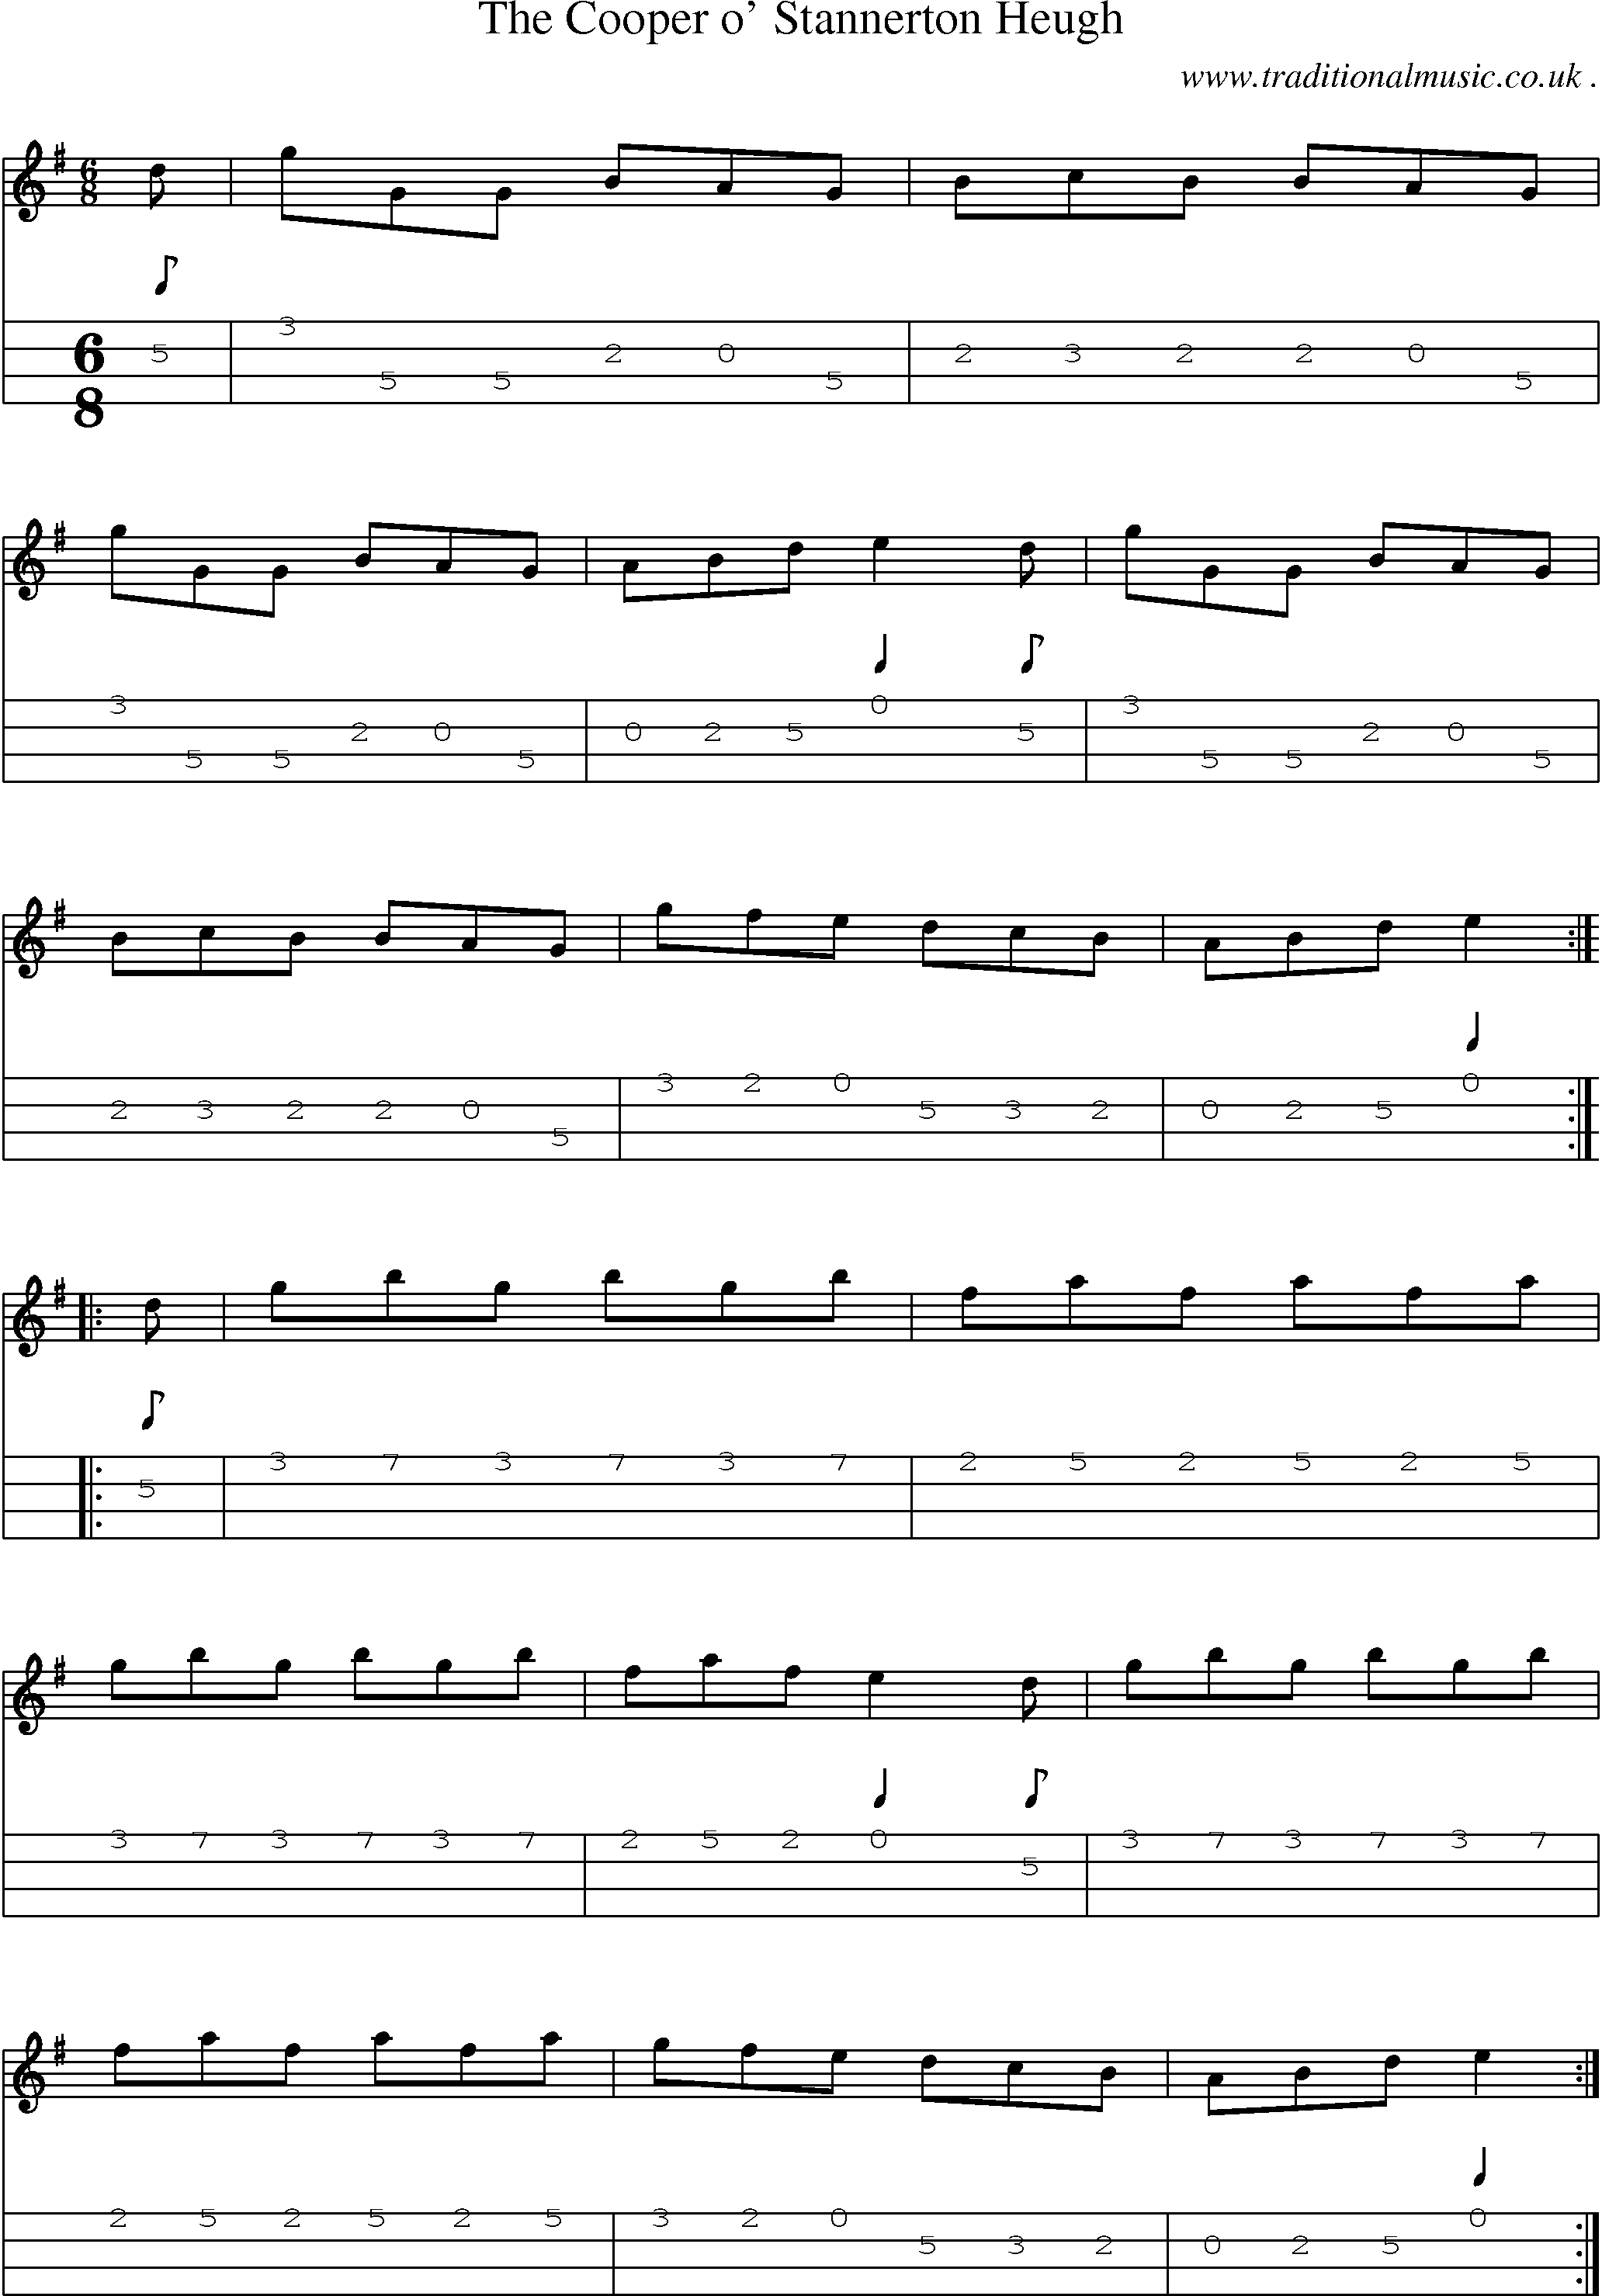 Sheet-Music and Mandolin Tabs for The Cooper O Stannerton Heugh